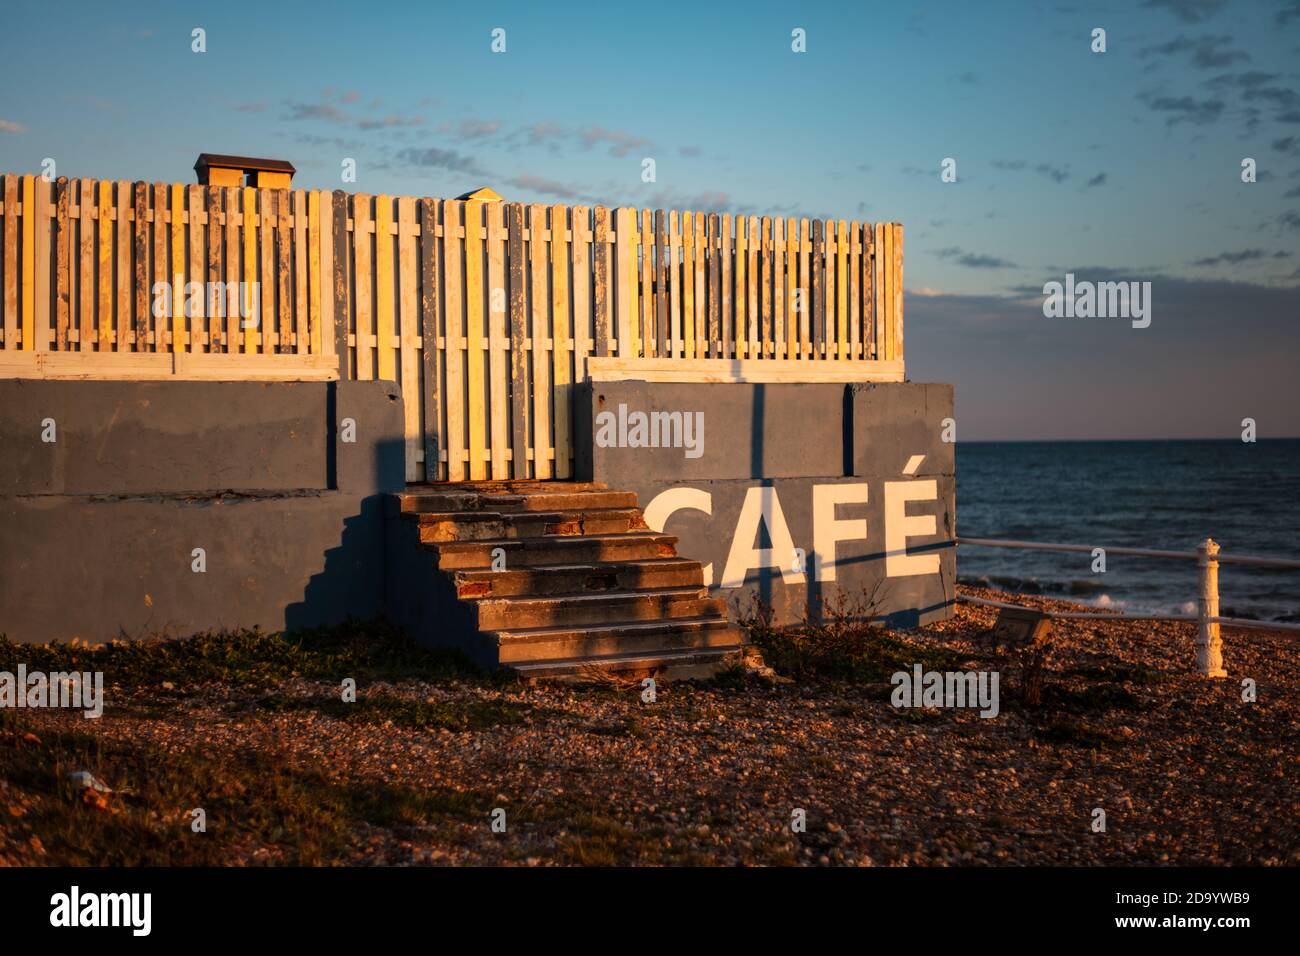 A Cafe on St Leonards Seafront, on the site of the former Bathing Pool Stock Photo